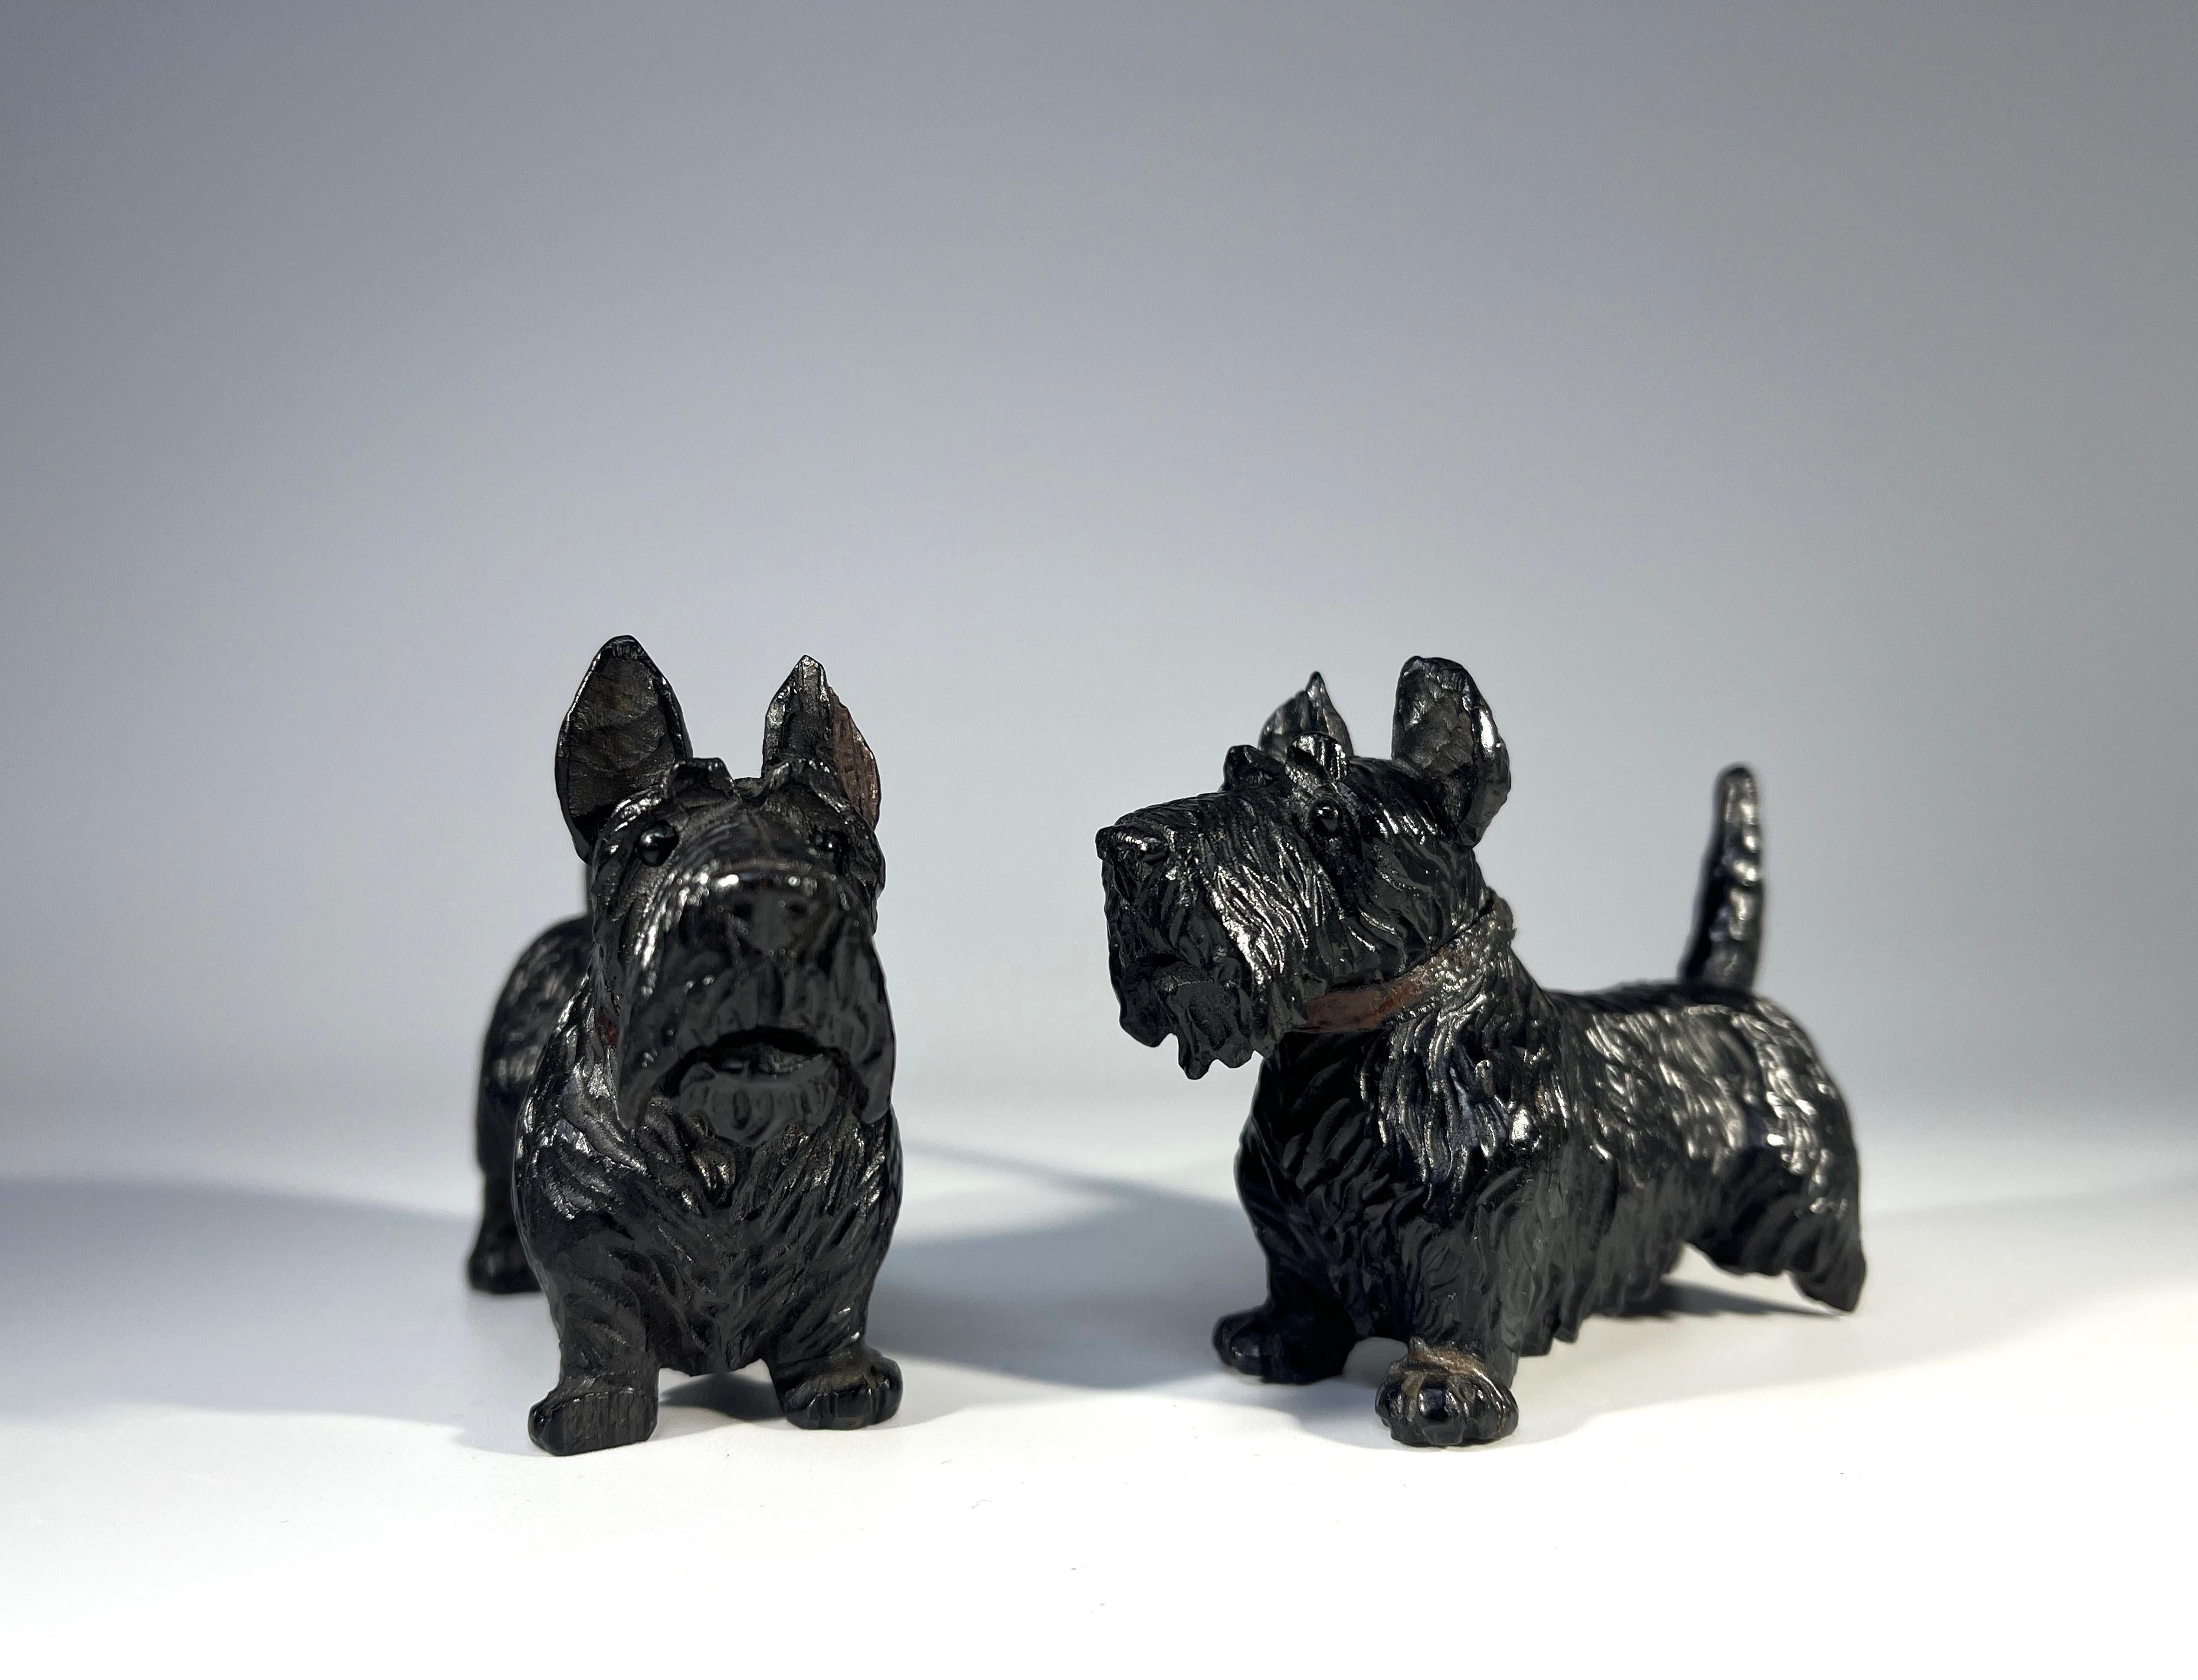 A brave and diehard pair of miniature Black Forest hand carved wooden Scottish Terrier dogs
Carved in typical dark wood and sporting leather collars, these Scotties were most likely created in the mid 20th century
Figure 1. Height 2.5 inch, Width 1